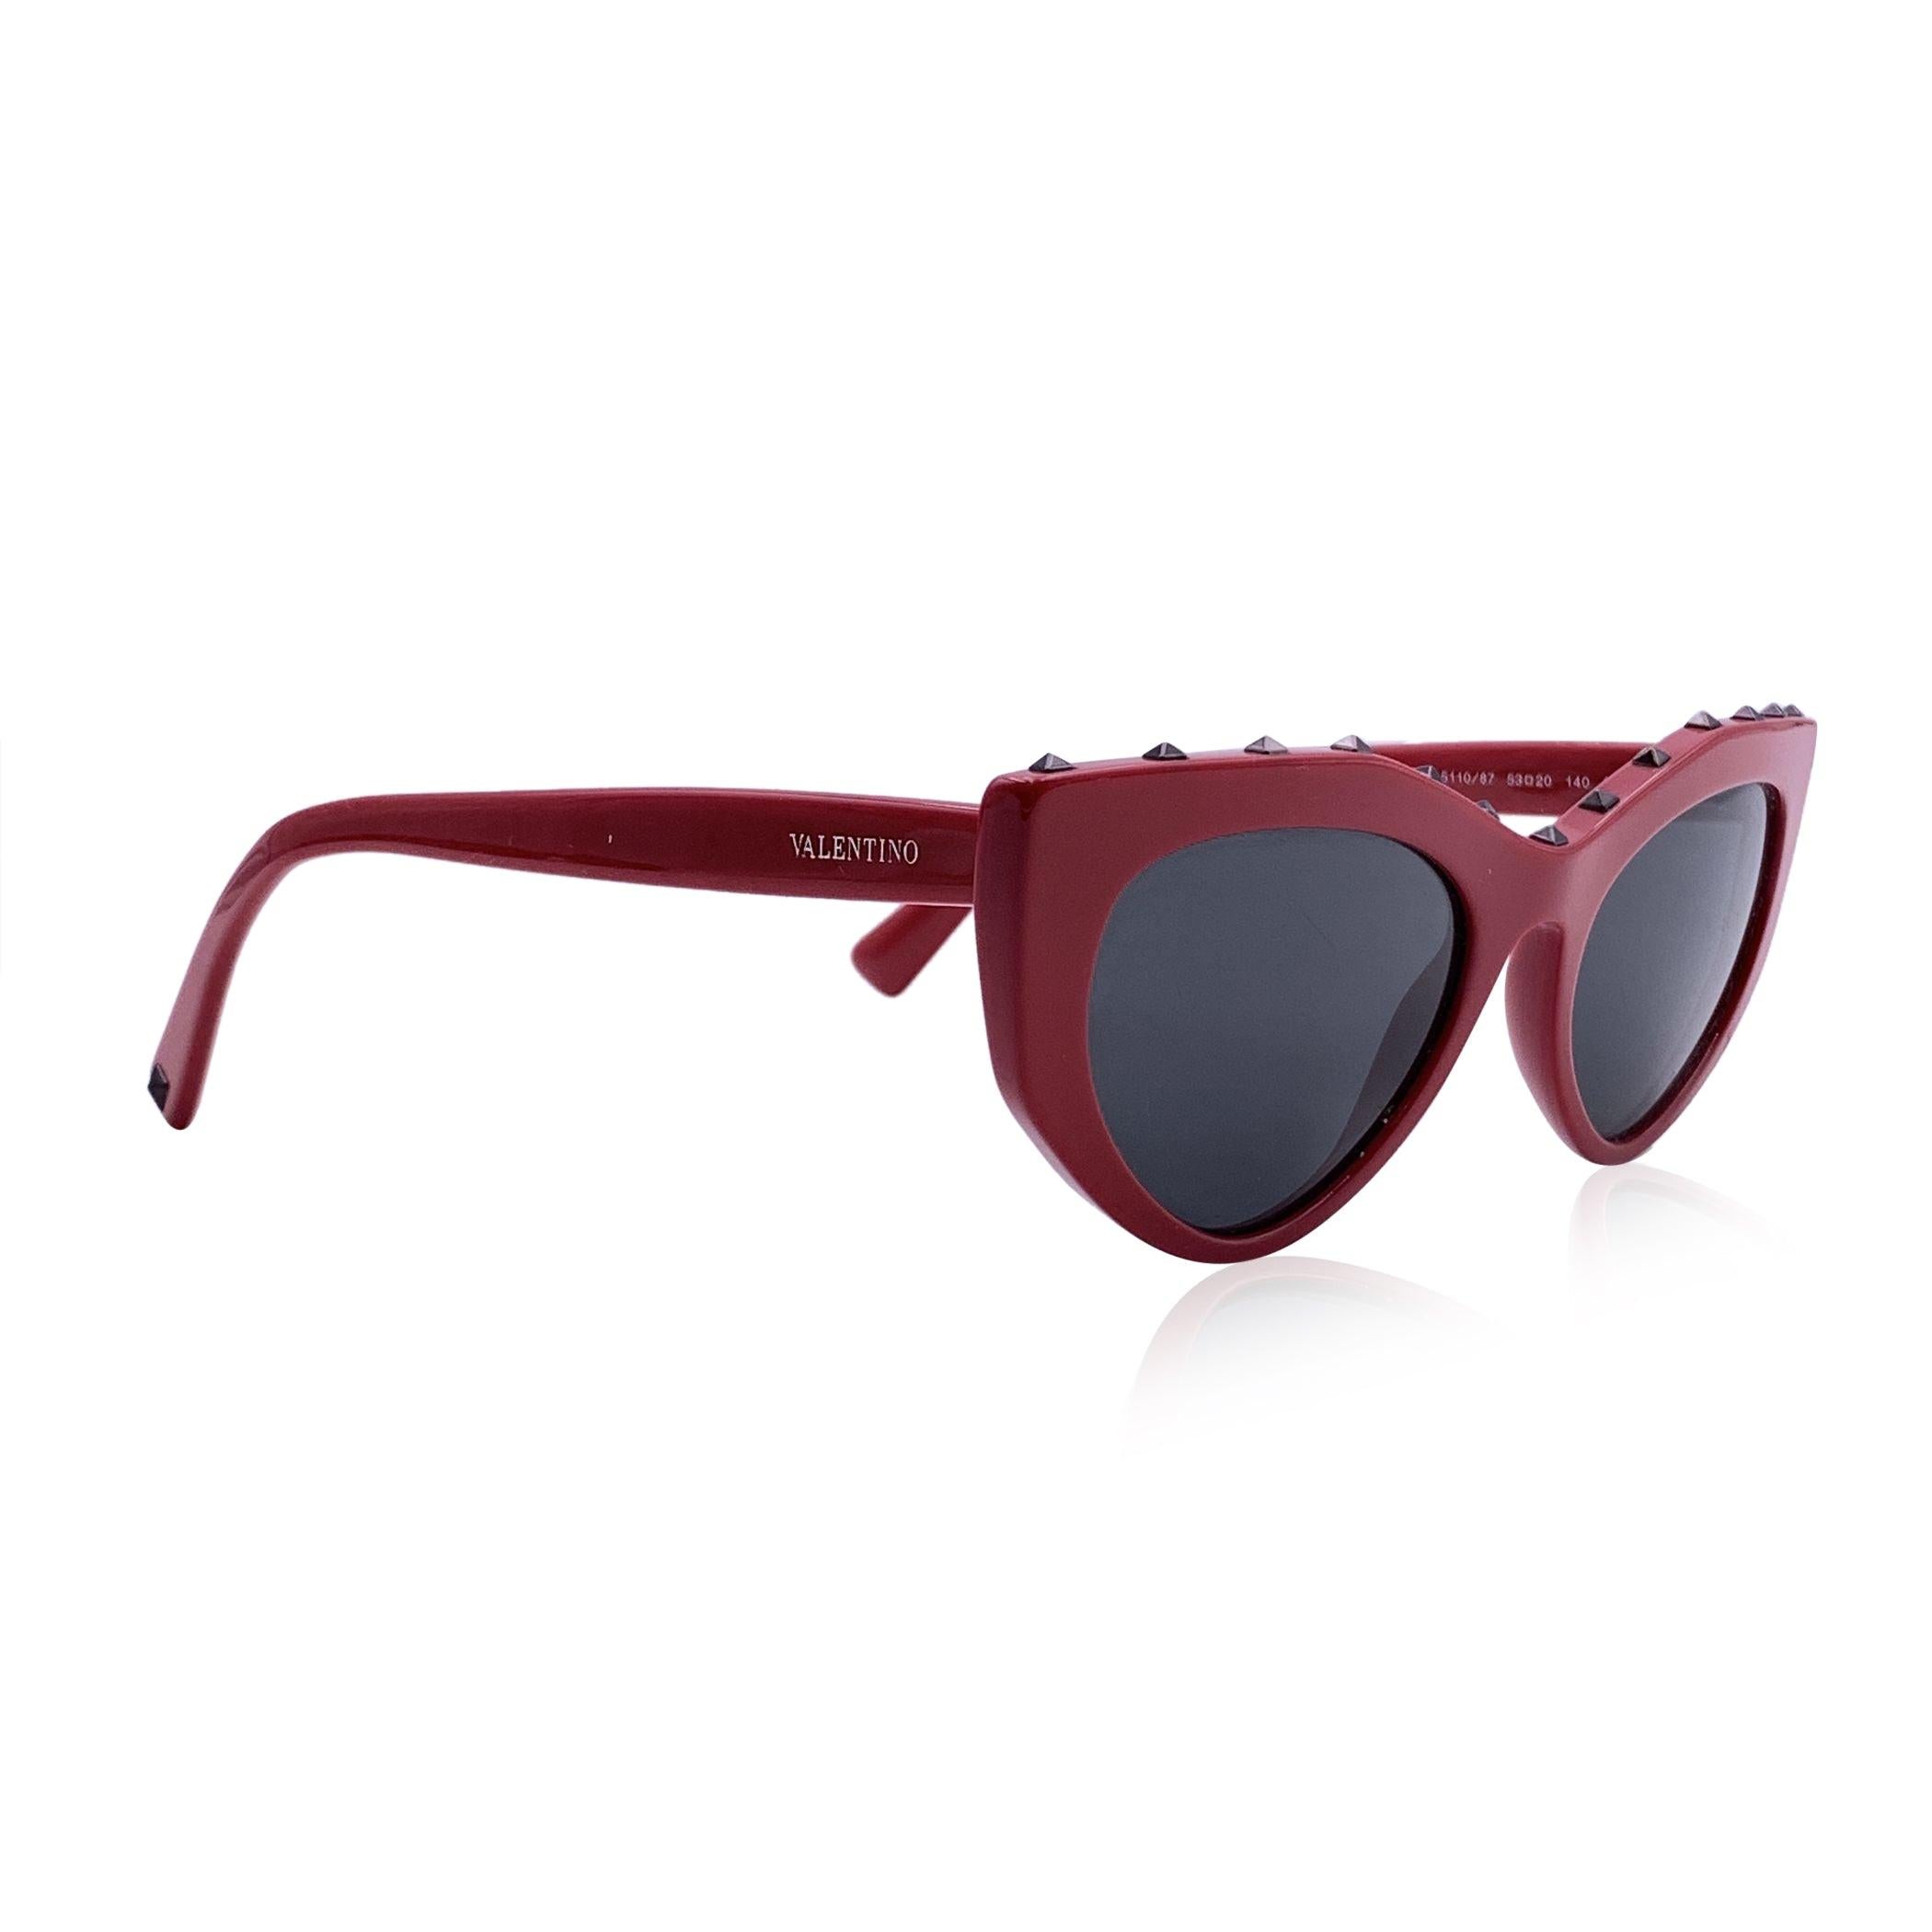 Valentino Red Acetate Soul Rockstud Sunglasses 4060 53/20 140mm In Excellent Condition For Sale In Rome, Rome